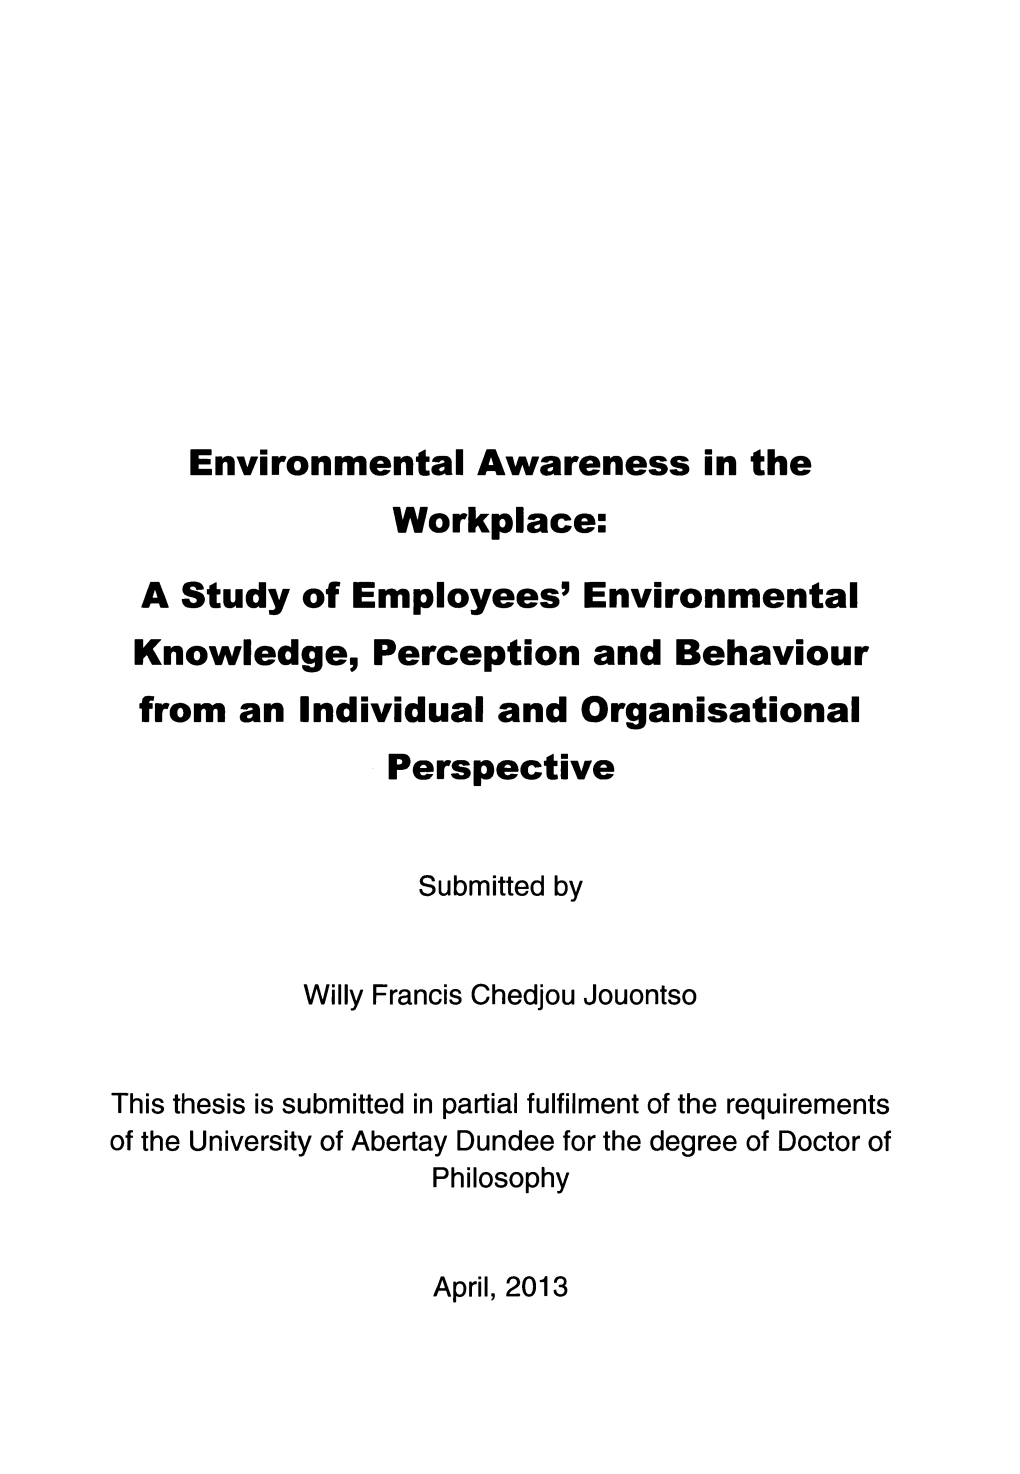 Environmental Awareness in the Workplace: a Study of Employees’ Environmental Knowledge, Perception and Behaviour from an Individual and Organisational Perspective